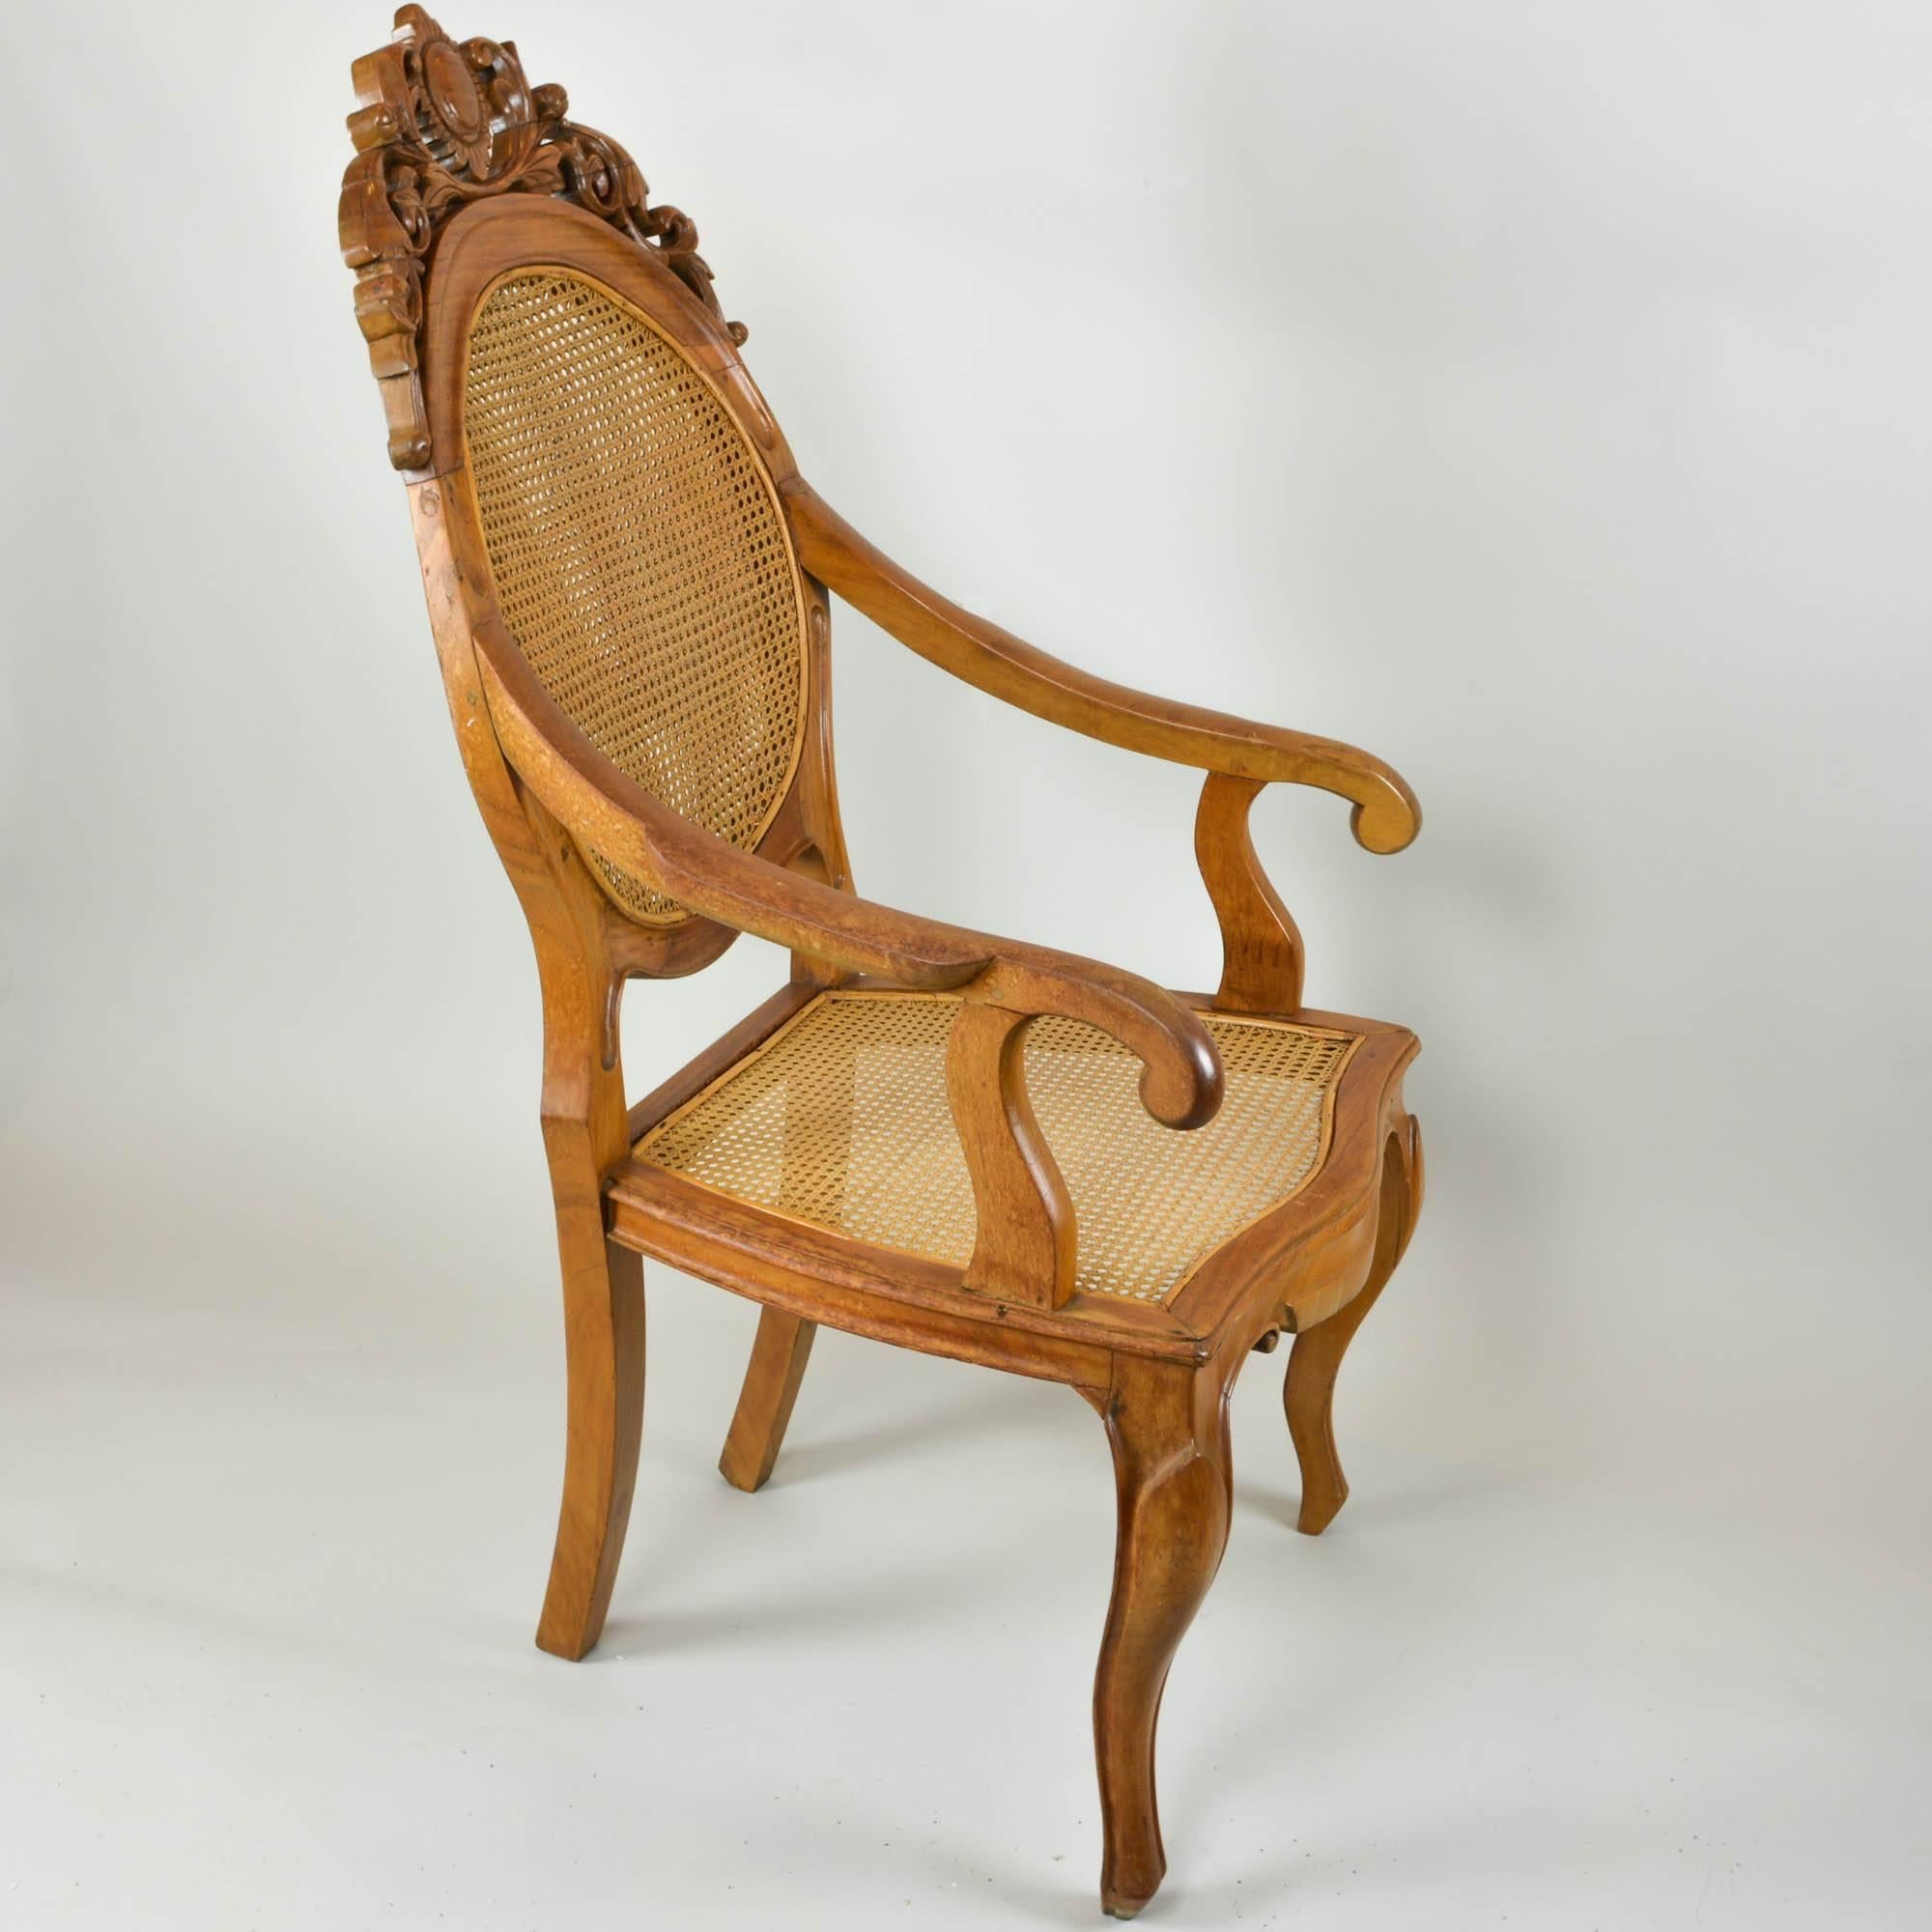 We couldn't resist picking up the carved back chair with a double caned back. The richness of the wood caught our eye and the quality of the caning made it a must have. Very comfortable with slightly reclining back and wide seat. The arms on the